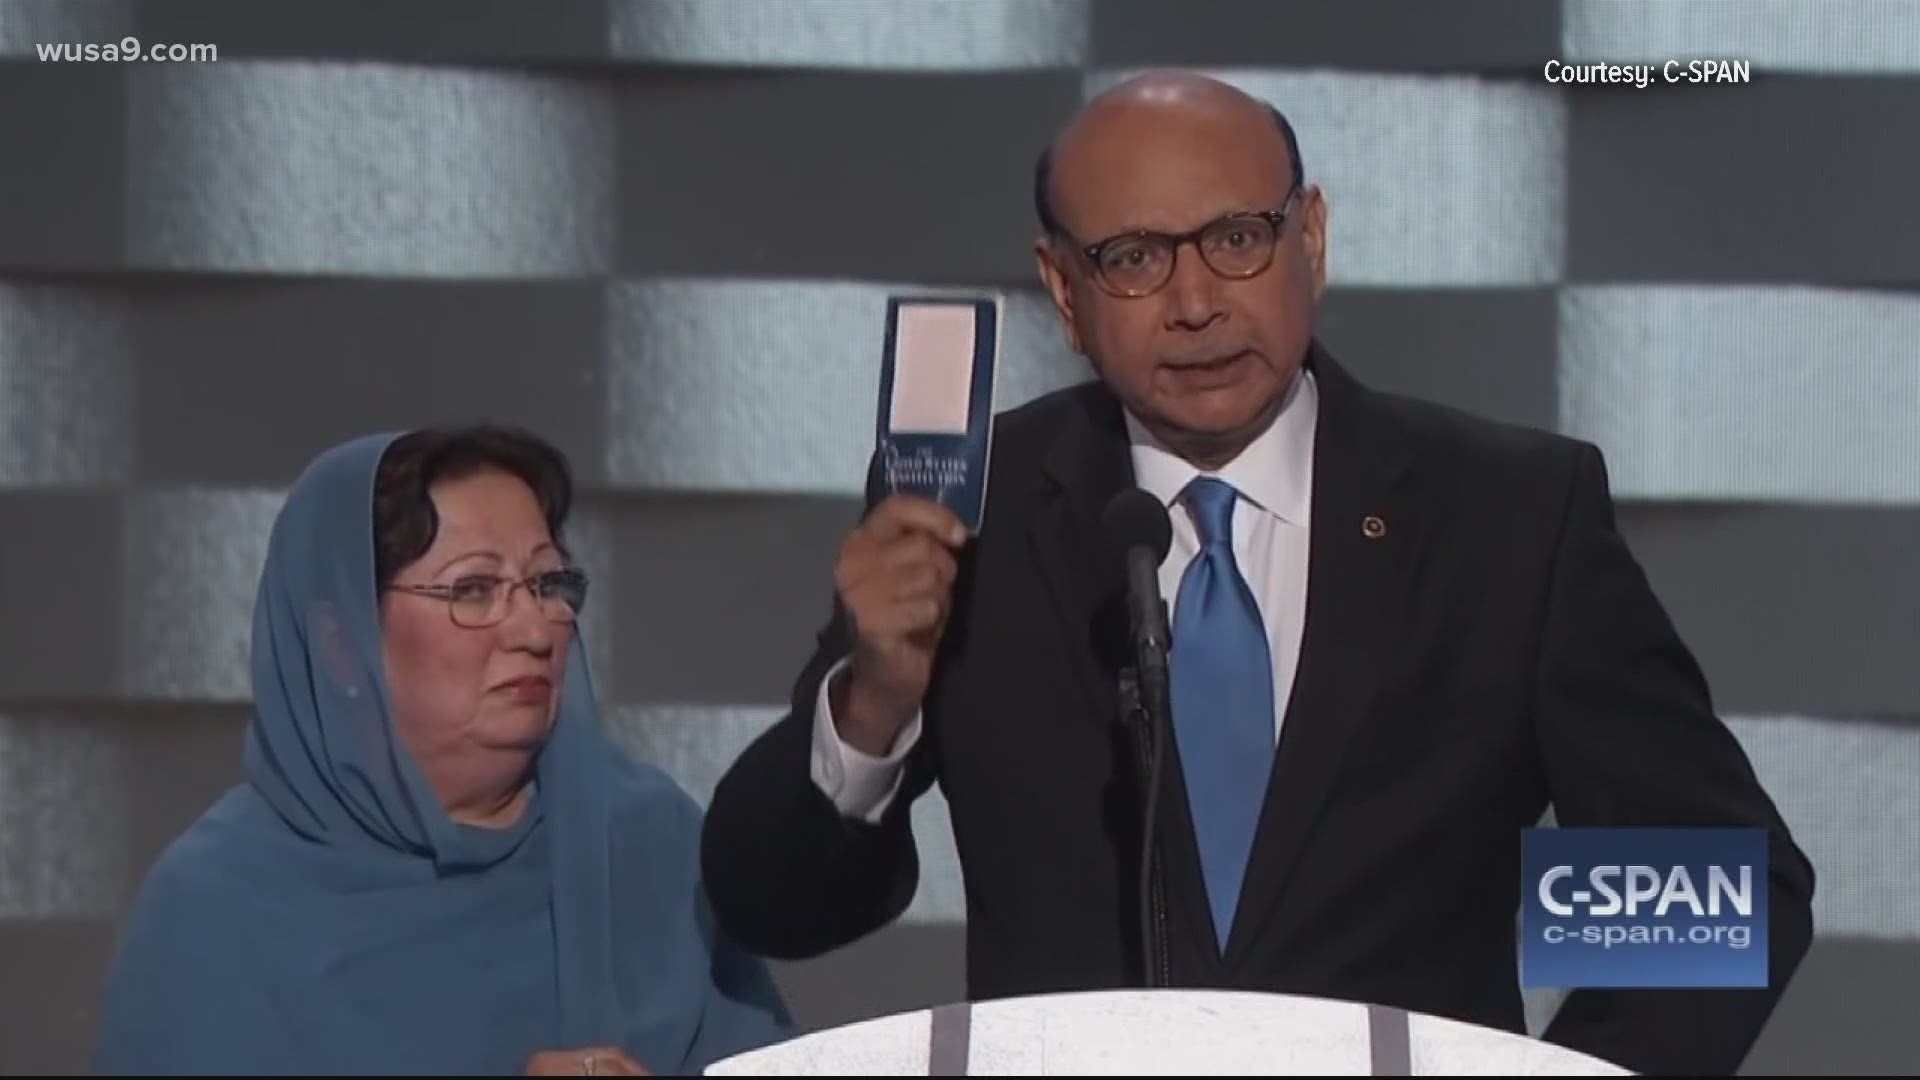 Khan will represent Virginia in the roll call portion of night two of the DNC, officially voting on behalf of the commonwealth for the Democratic ticket.